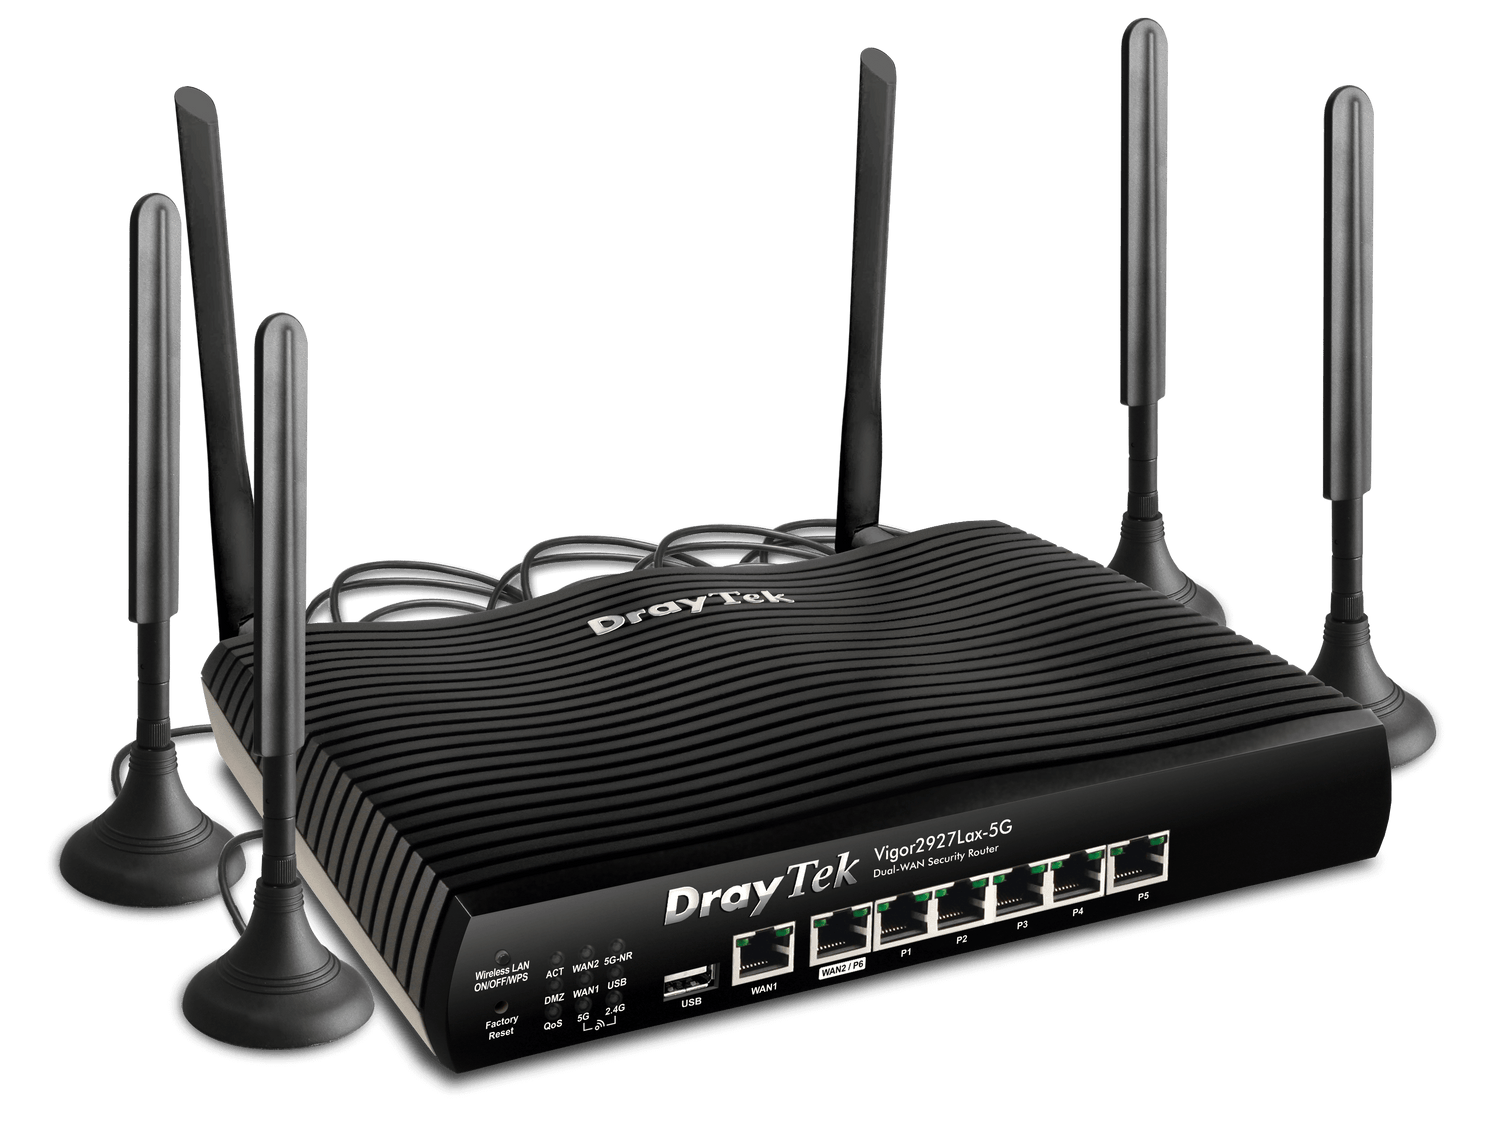 DrayTek Vigor 2927LAX 5G Router with Wi-Fi 6 AX3000 Wireless Left Side Shown